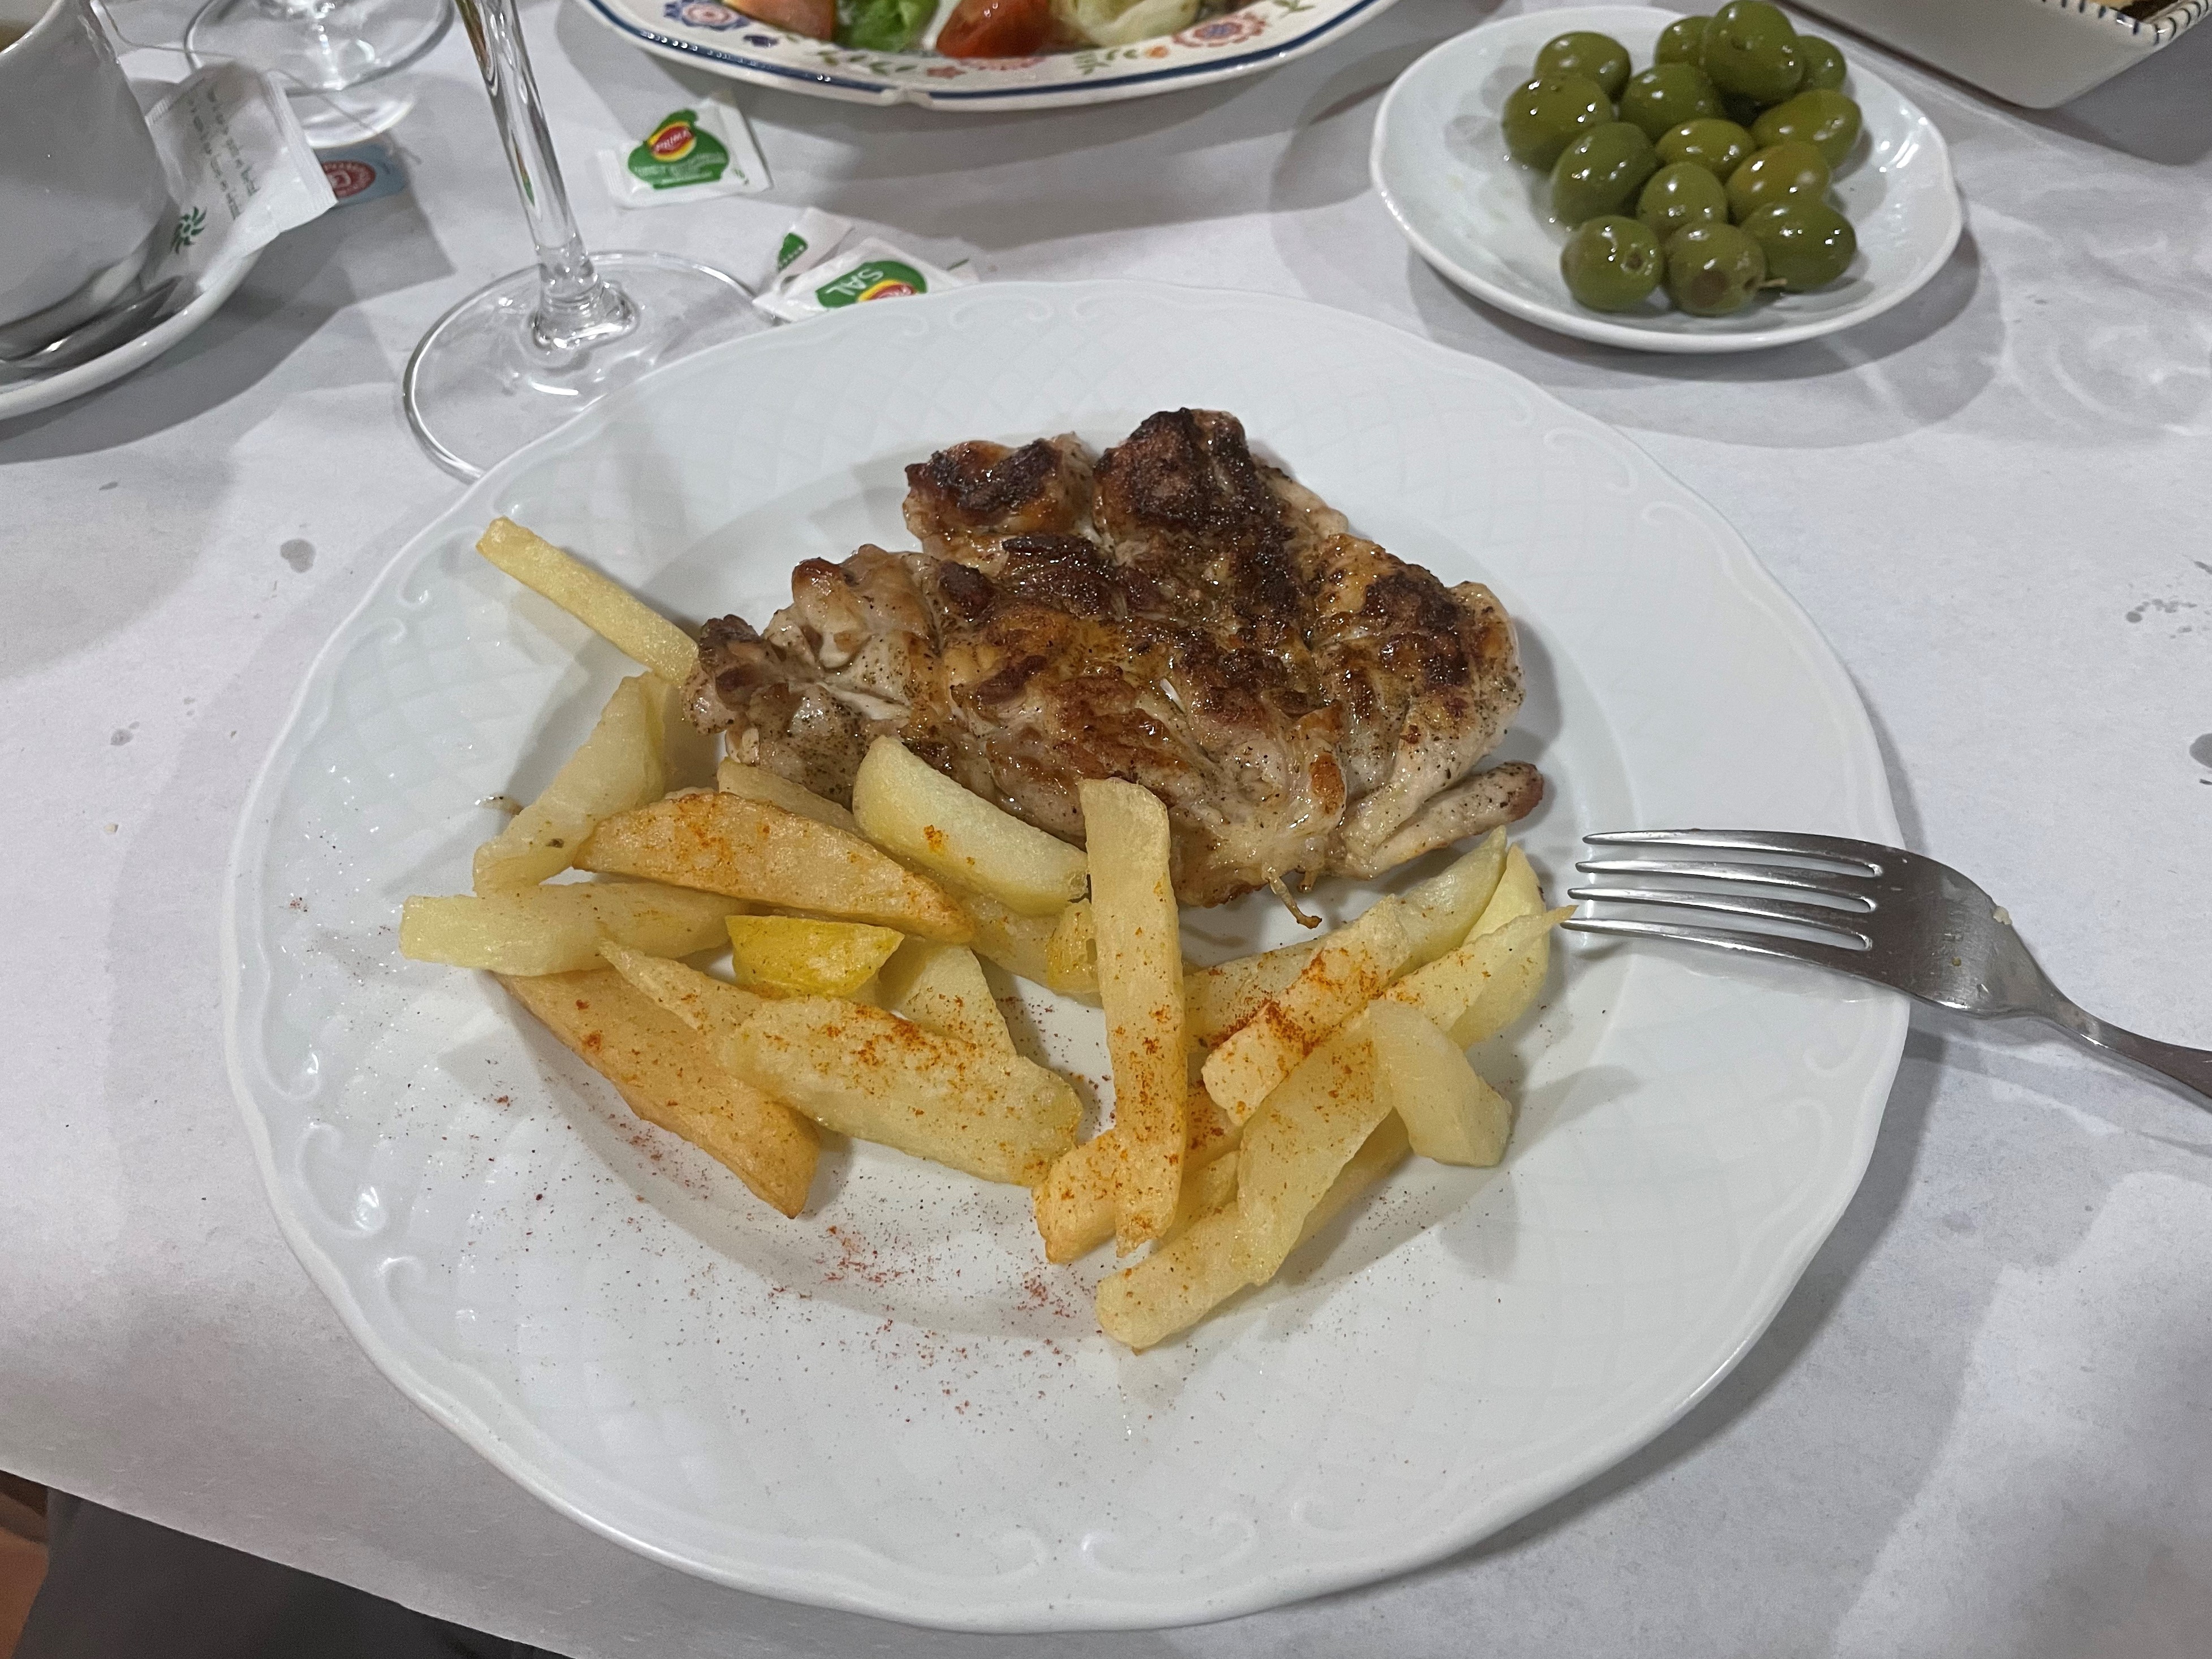 Deboned seared chicken and chips IMG_0811 (2).jpg